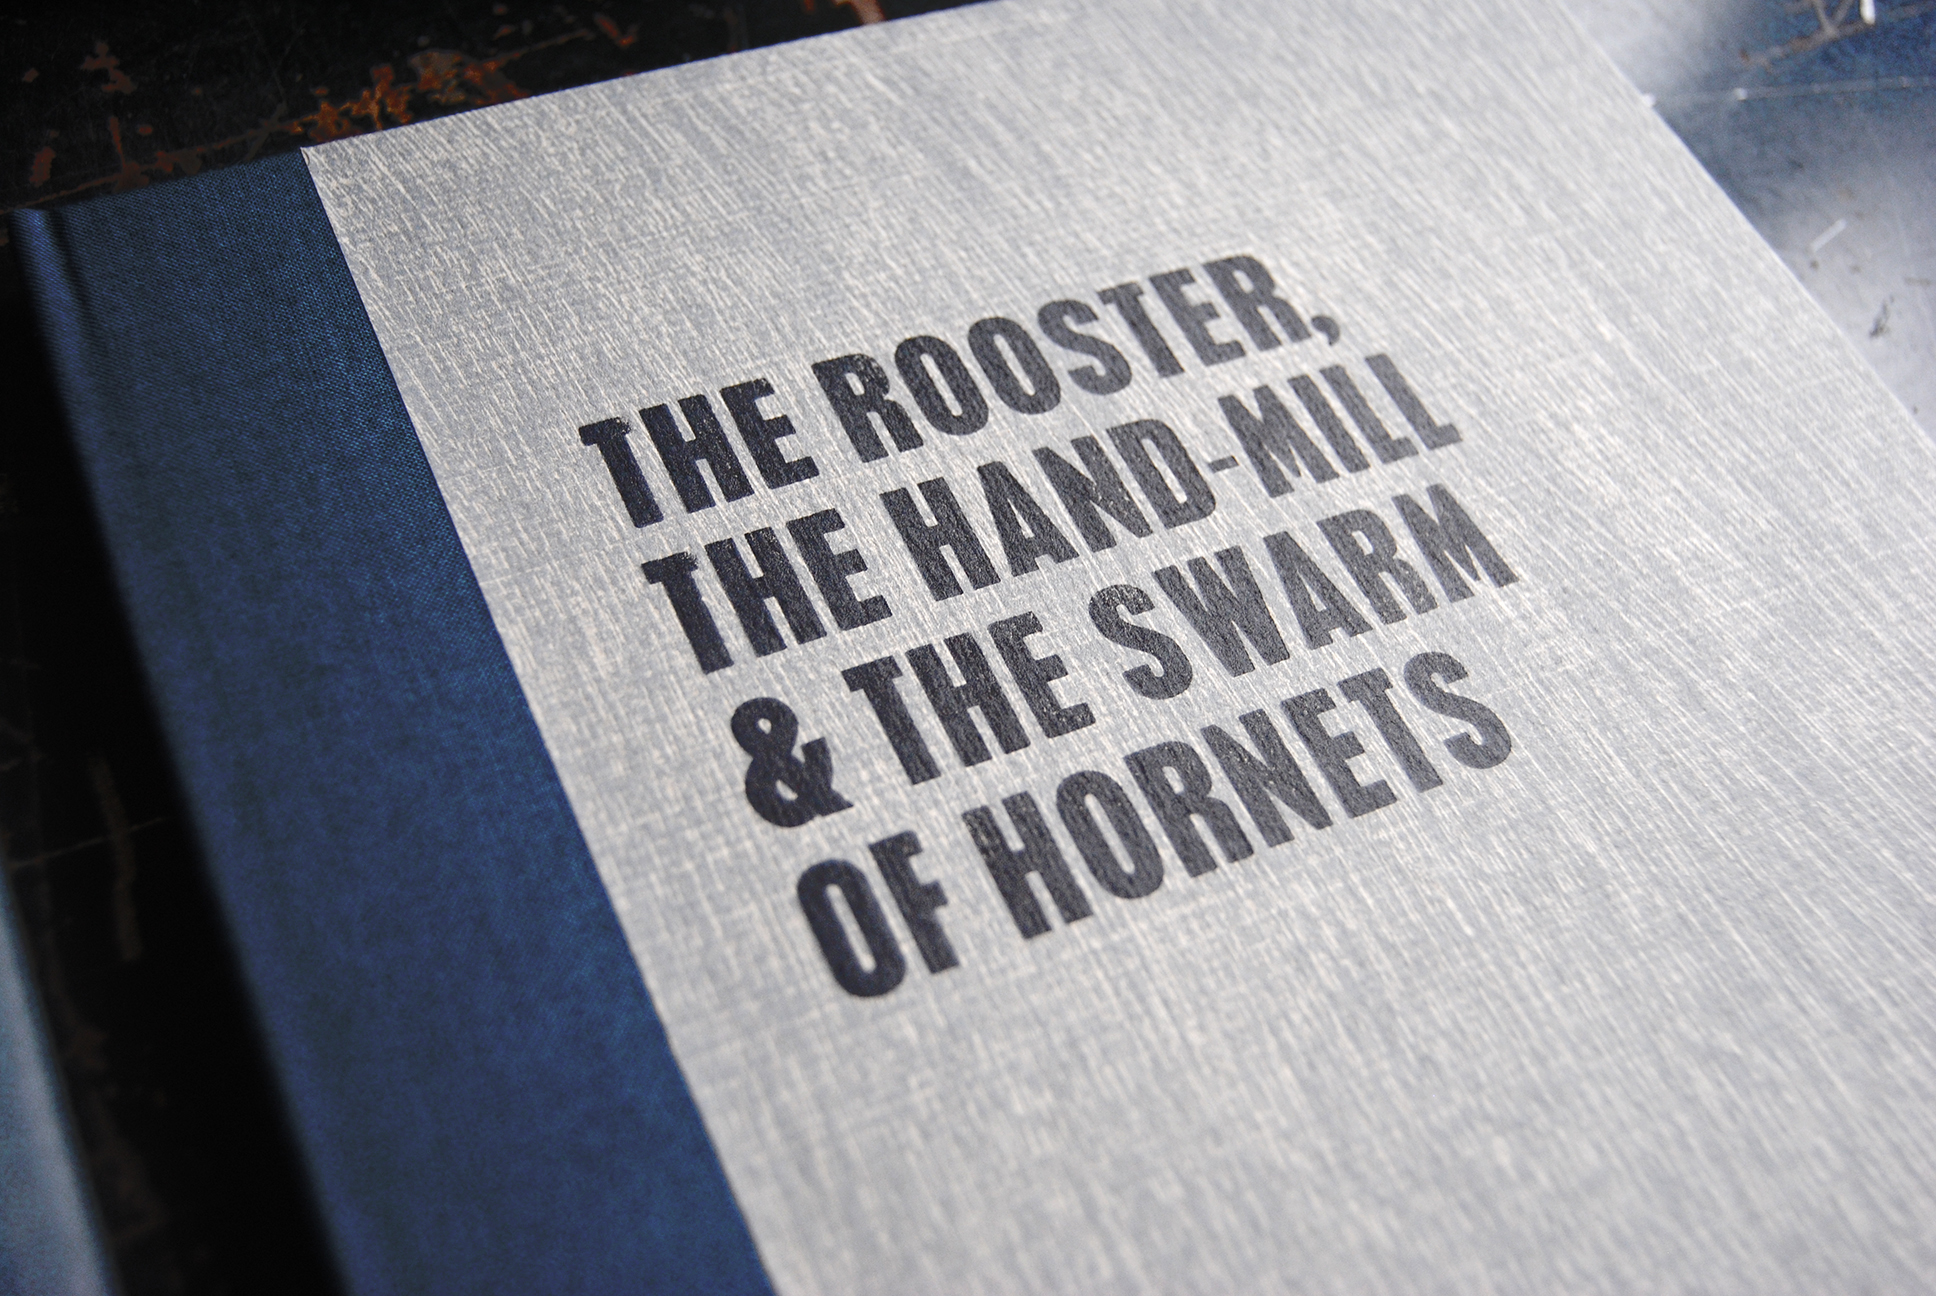 Cover image: The Rooster, The Hand-Mill & The Swarm of Hornets (2014)